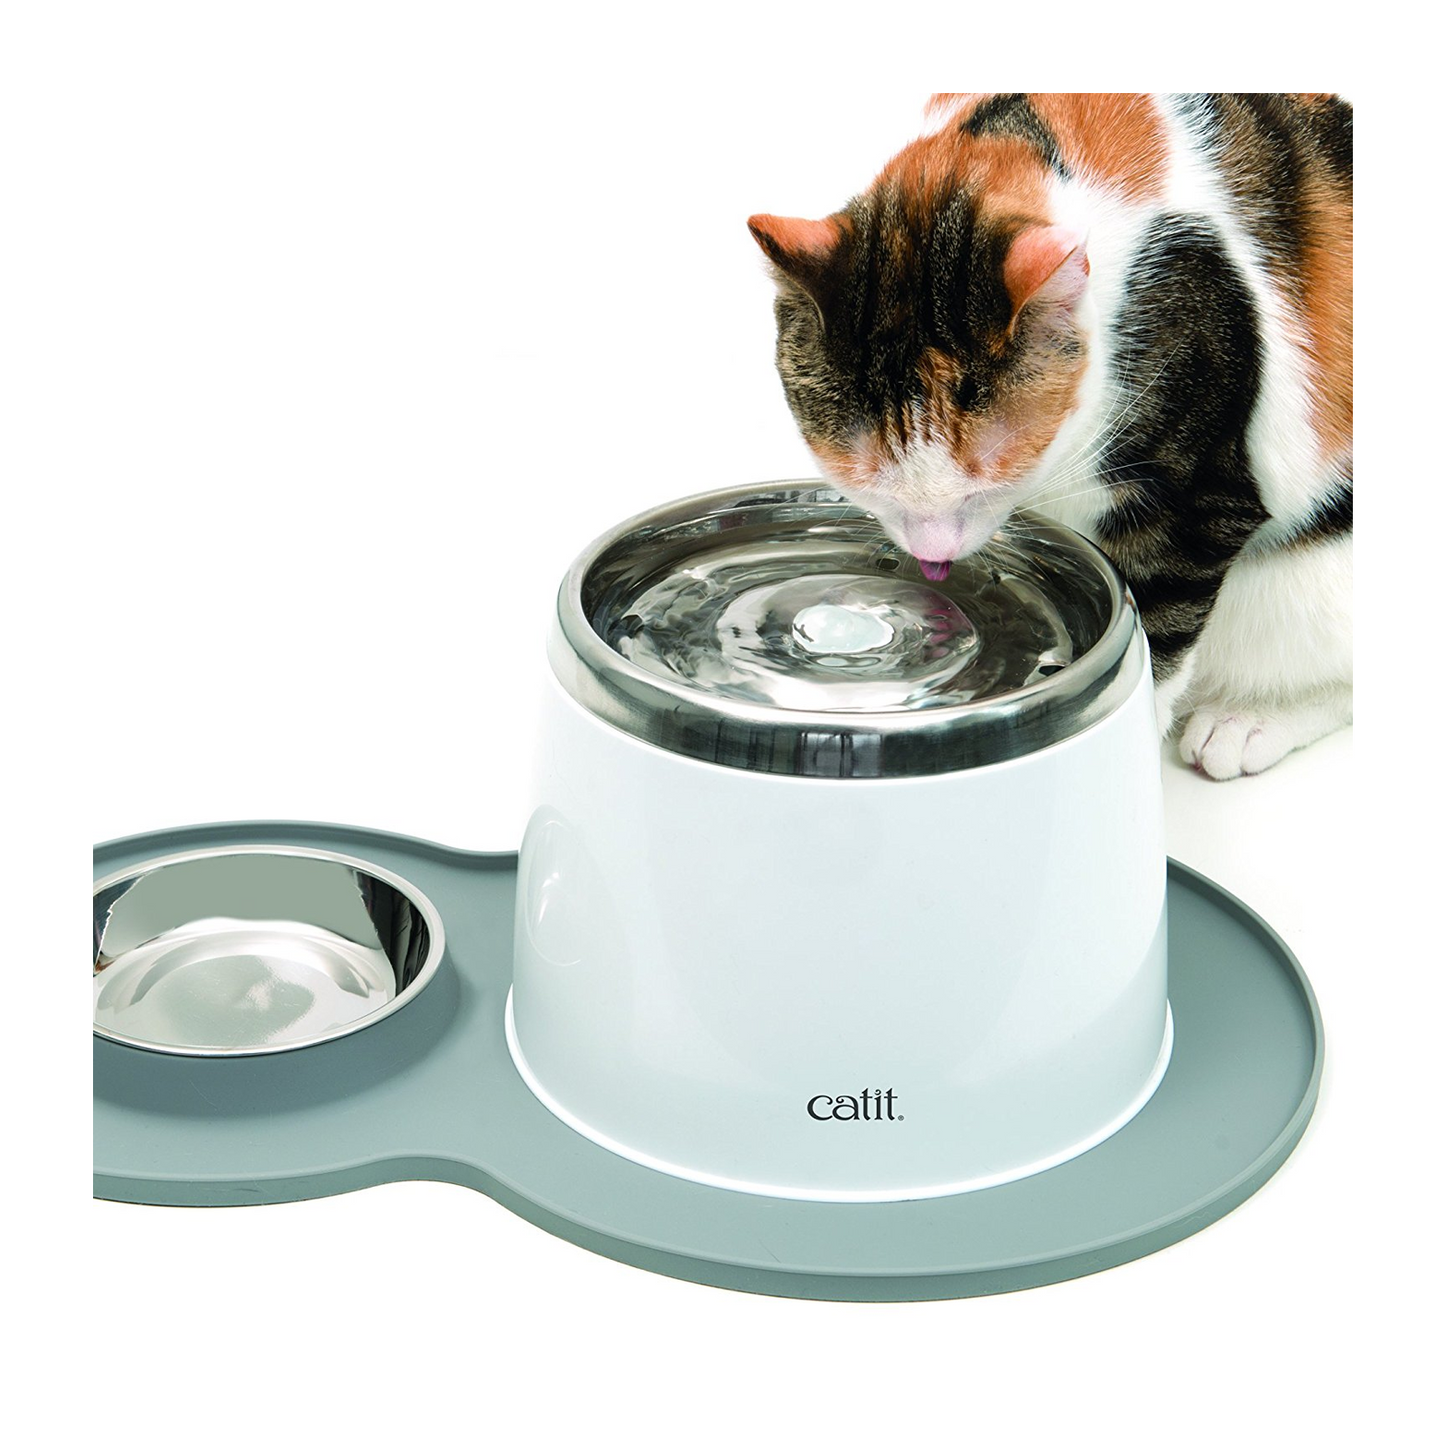 Catit Flower and Peanut Placement Mats for Fountains and Bowls